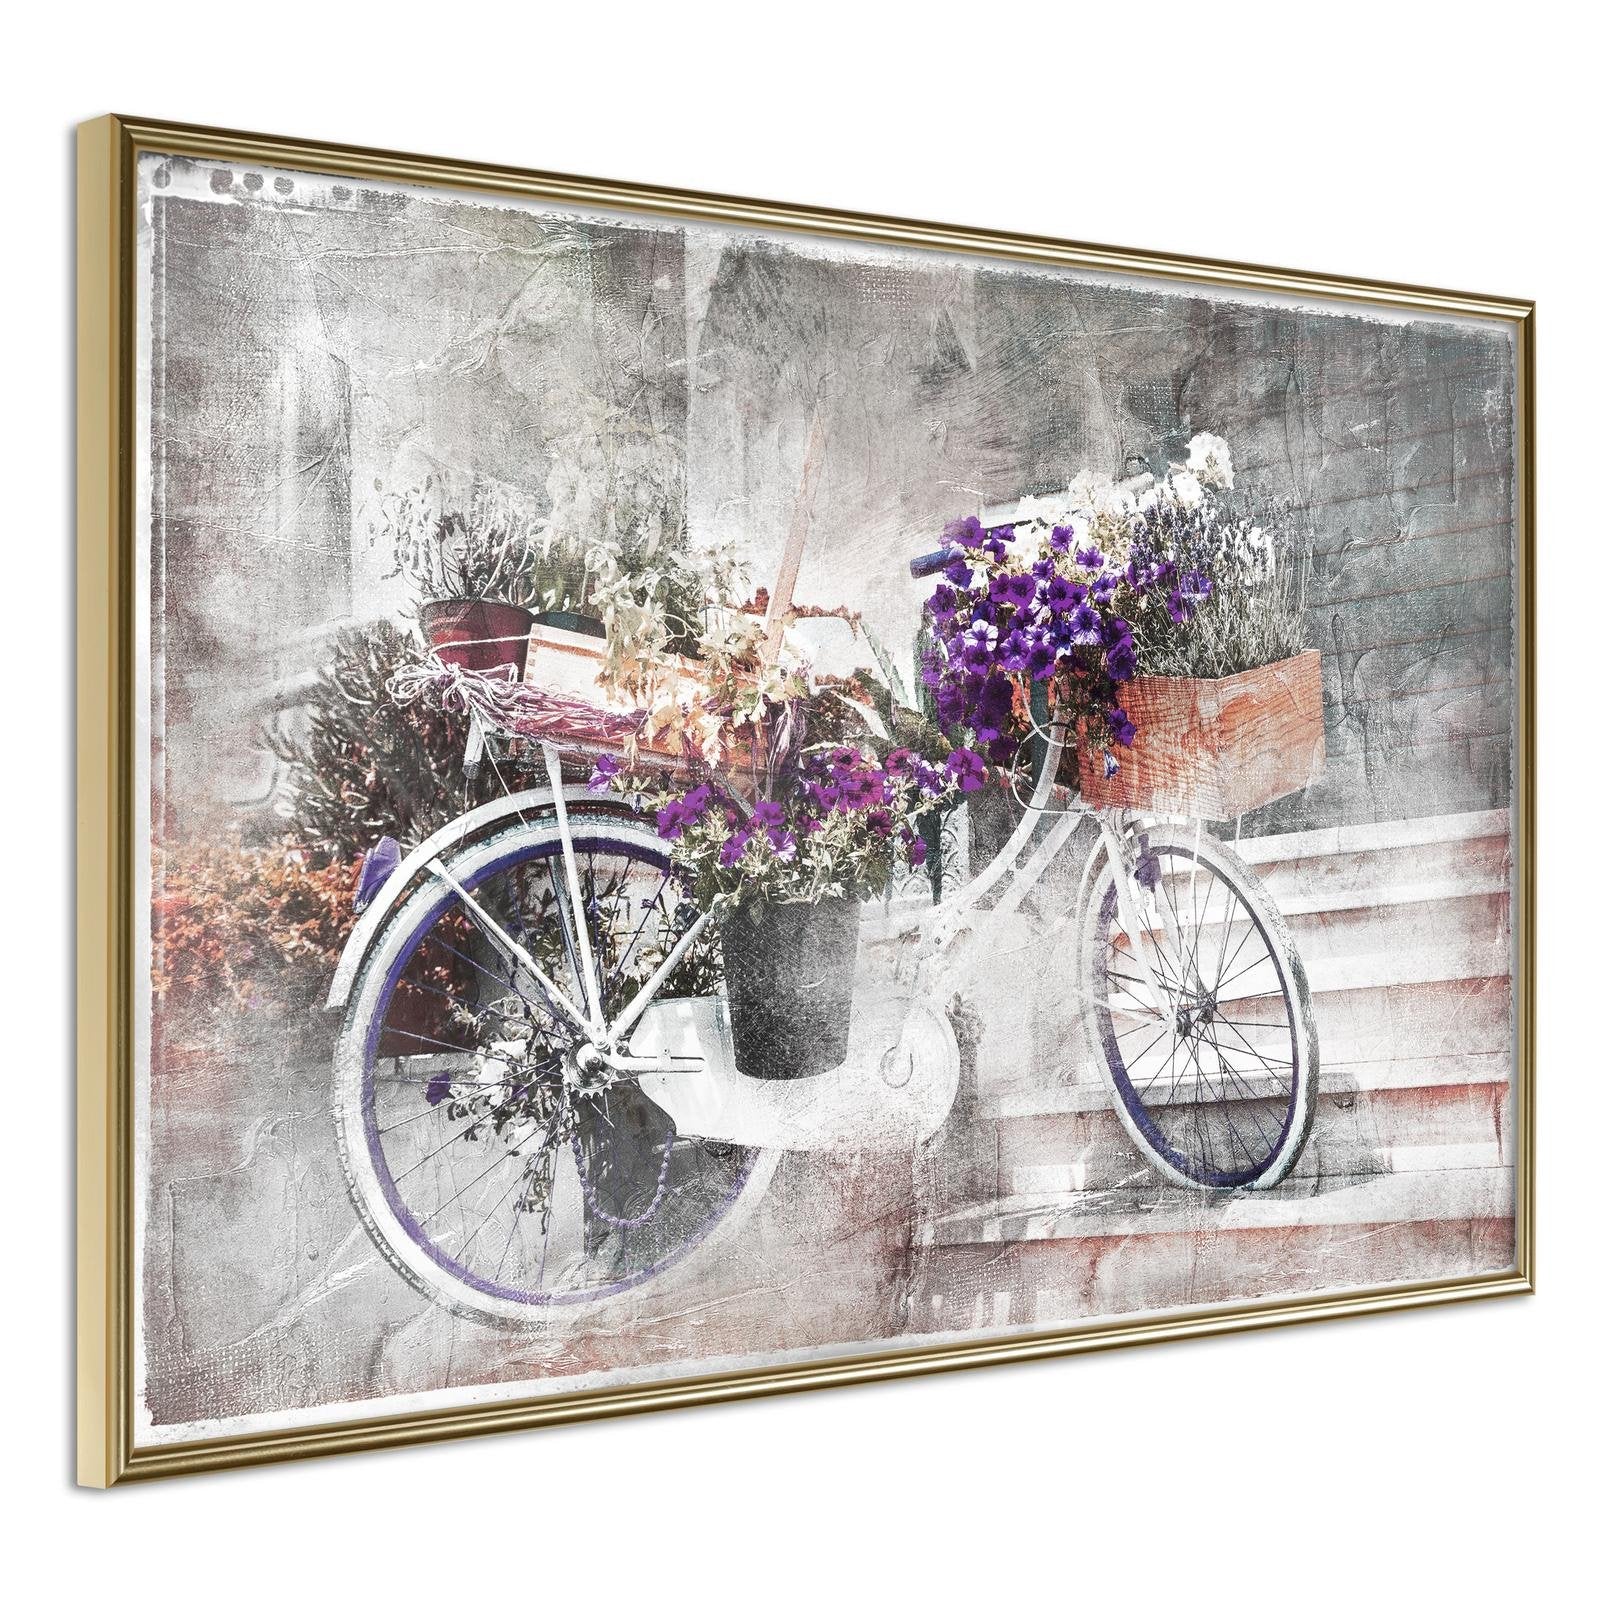 Inramad Poster / Tavla - Flower Delivery-Poster Inramad-Artgeist-30x20-Guldram-peaceofhome.se